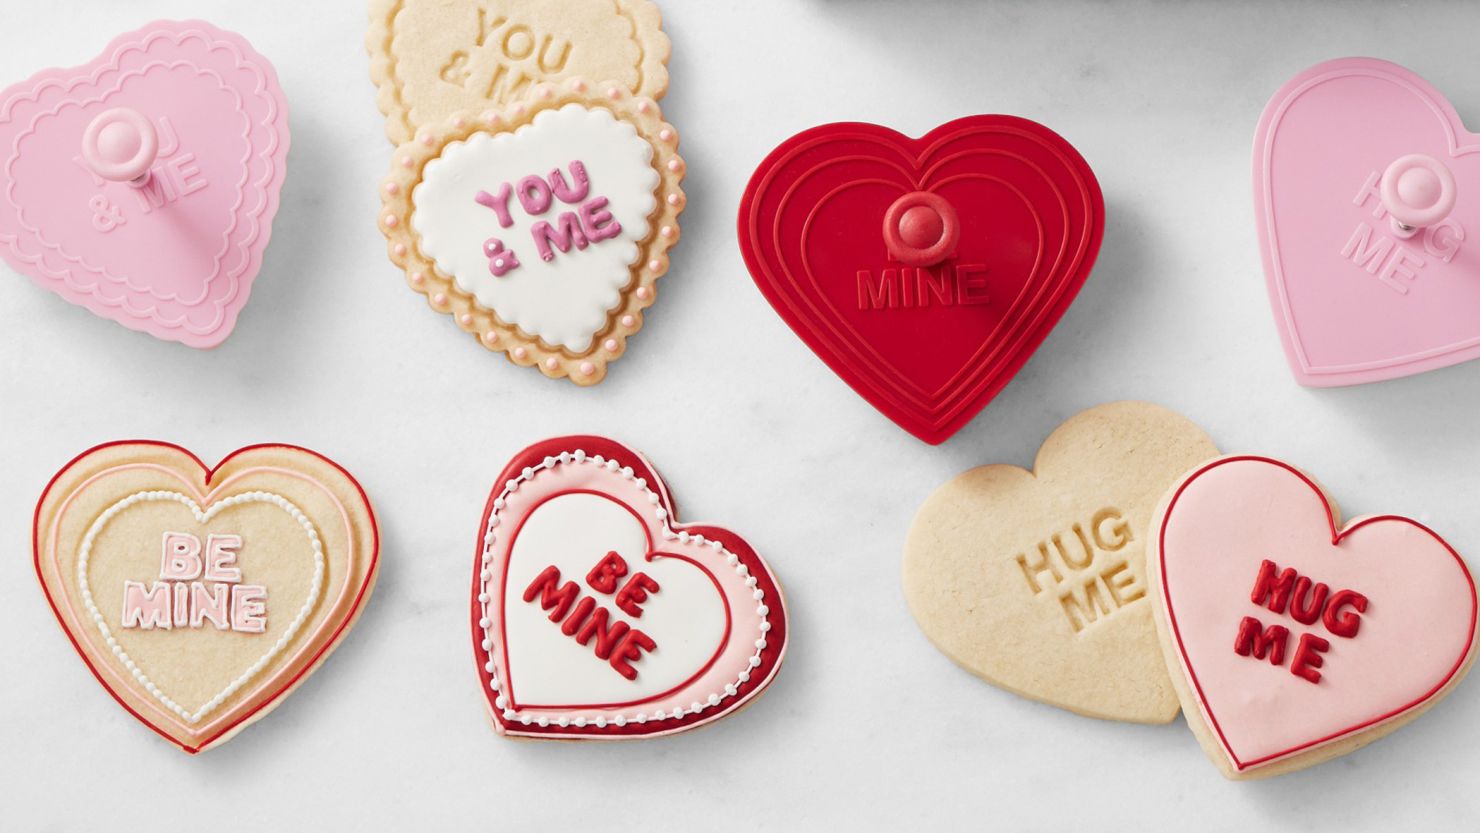 25 Best Heart-Shaped Foods to Make for Valentine's Day